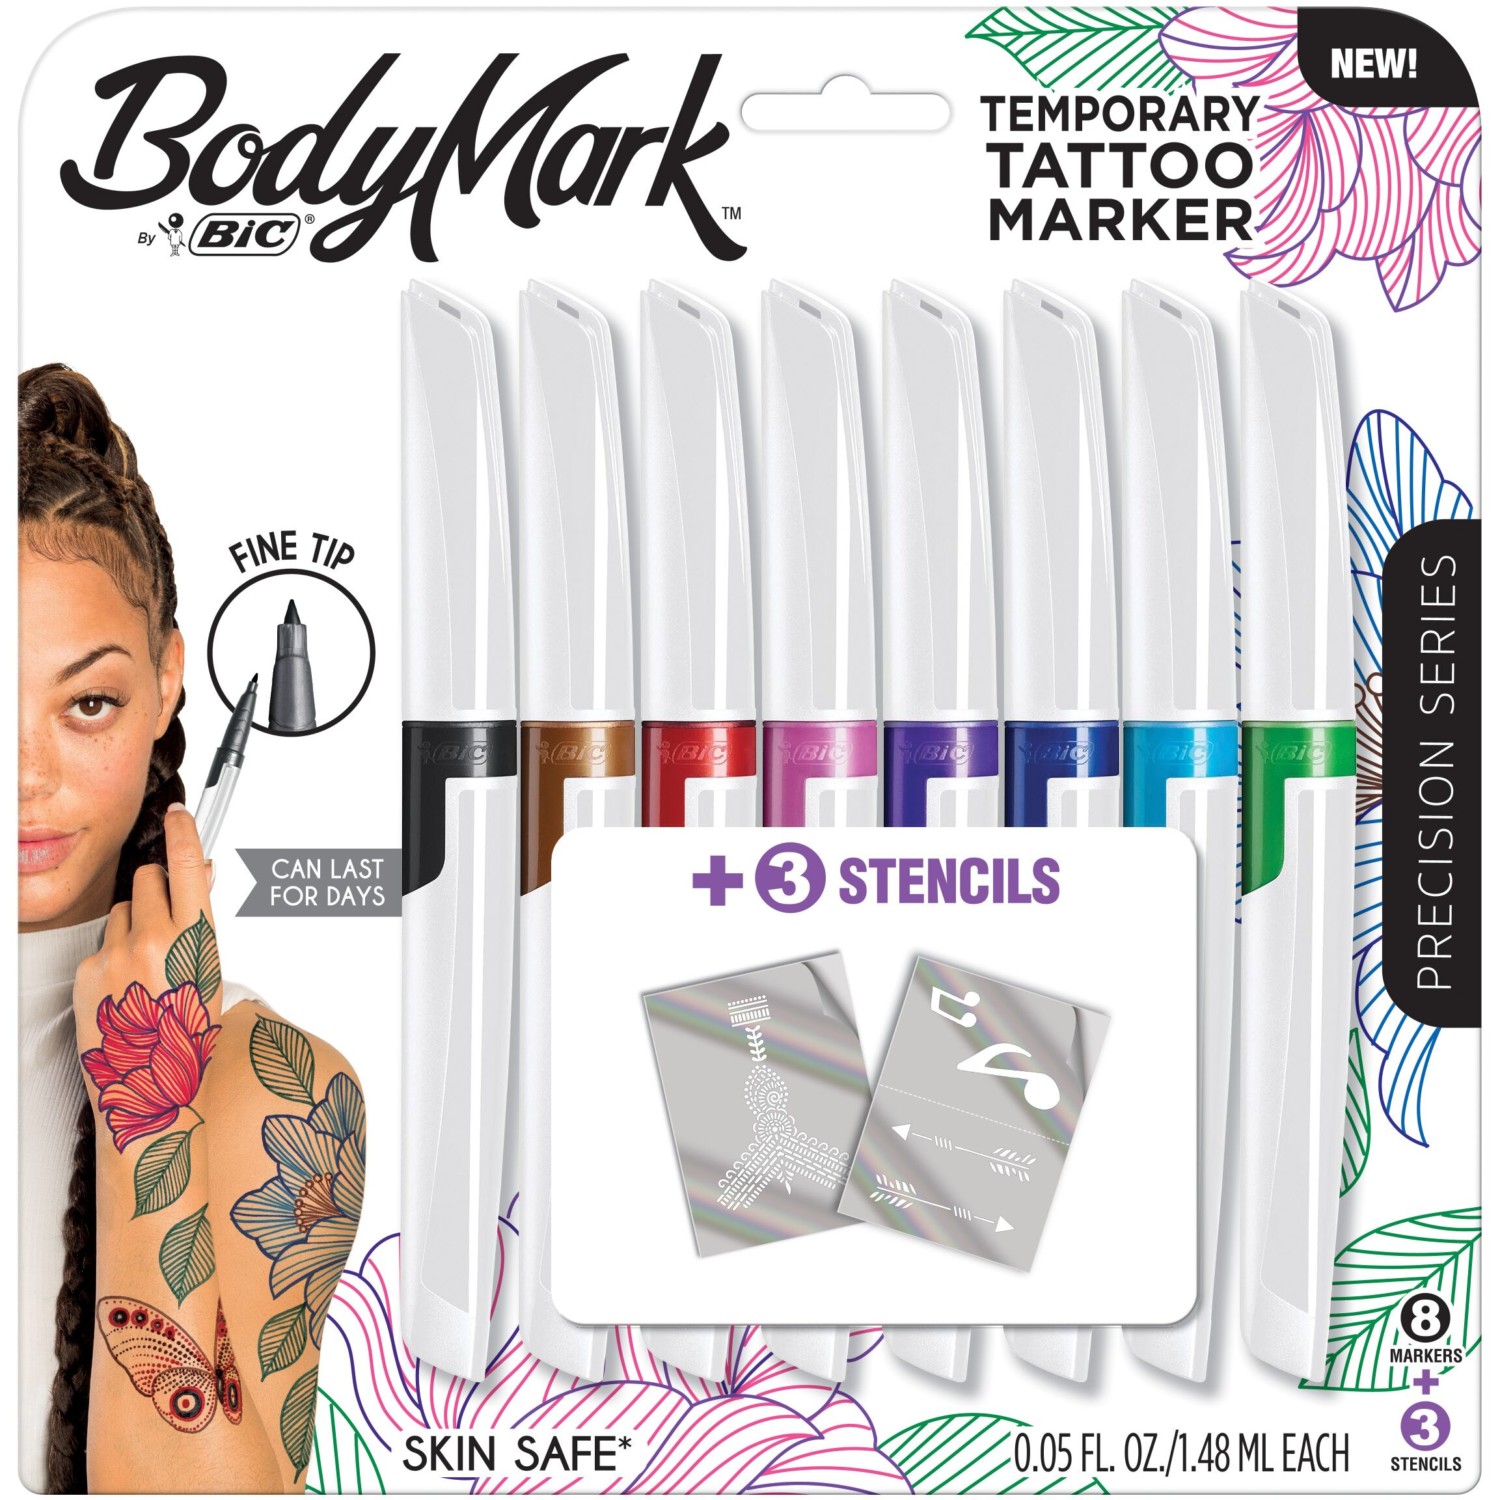 Give yourself a temporary tattoo with new skin-safe markers